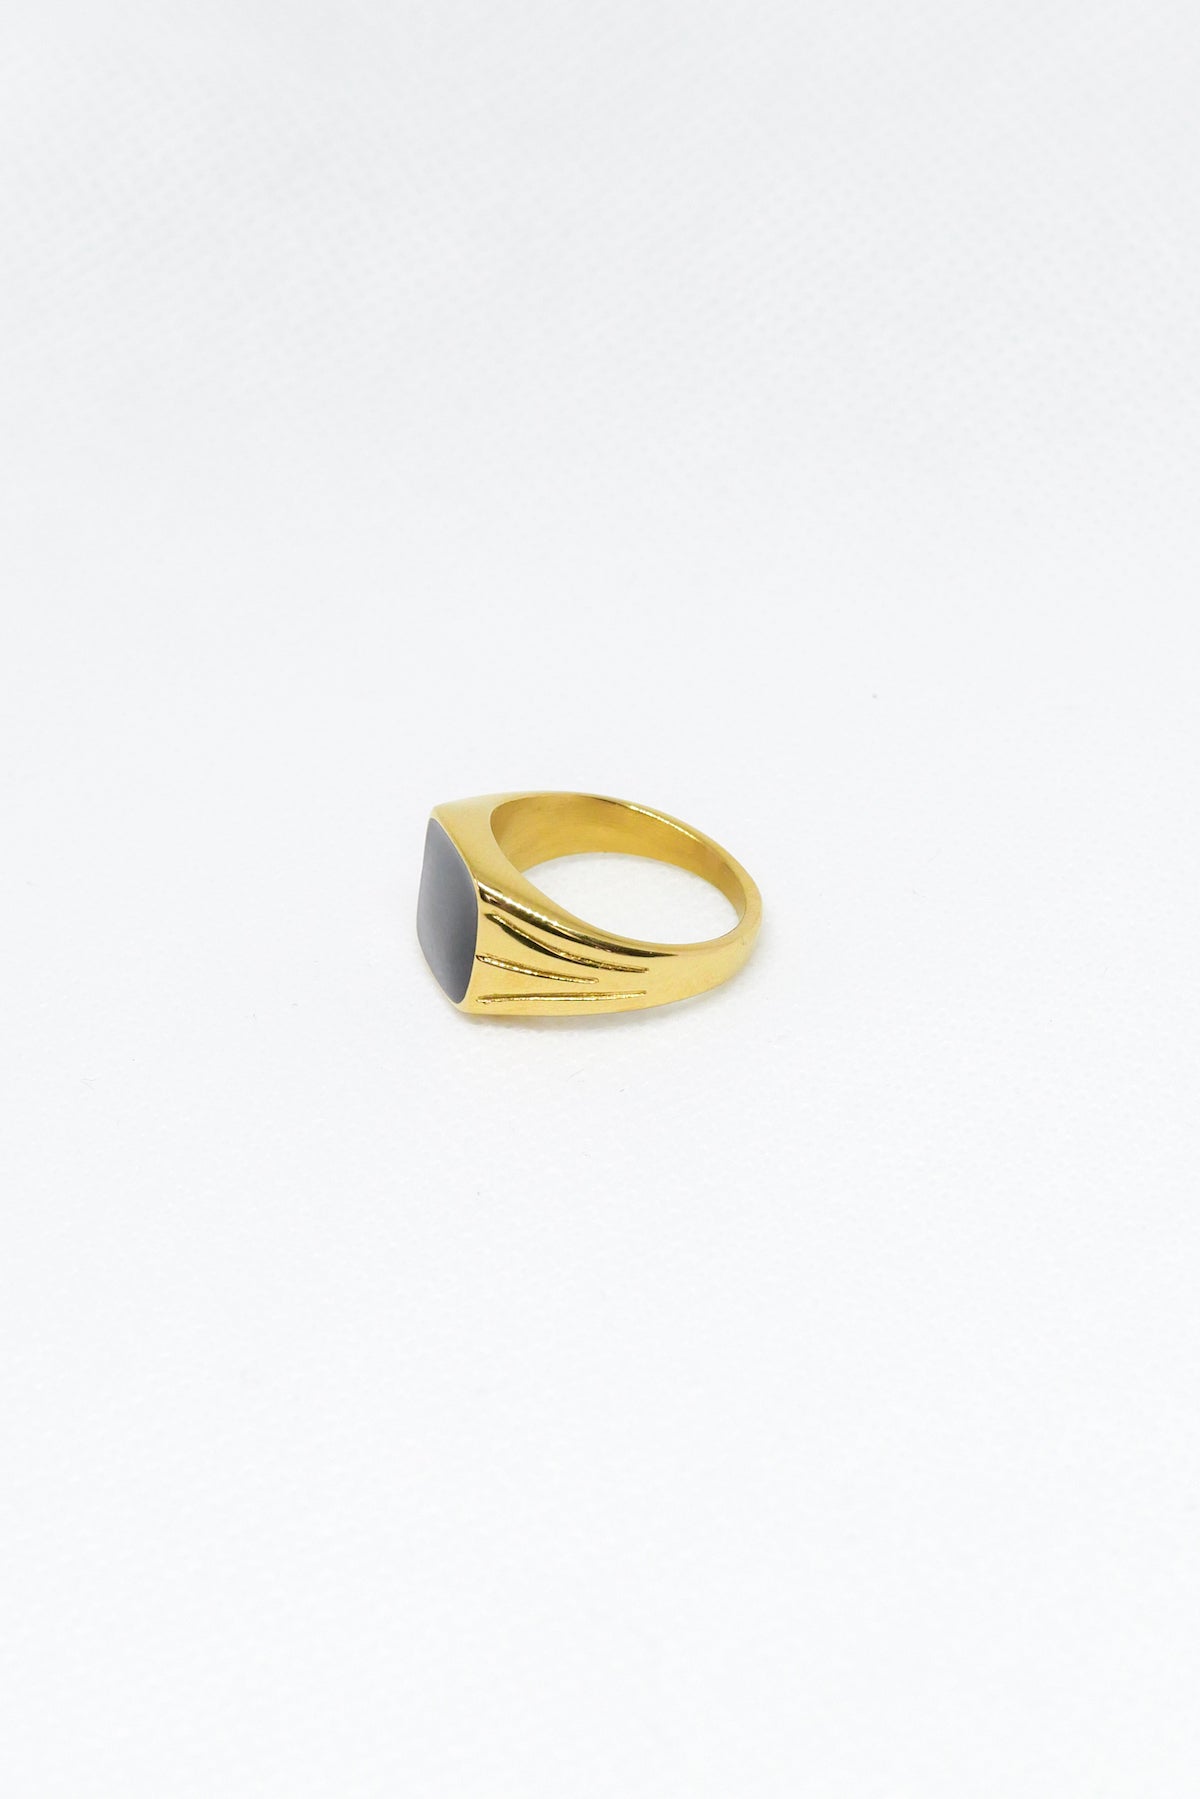 Onyx ring side view on white background 